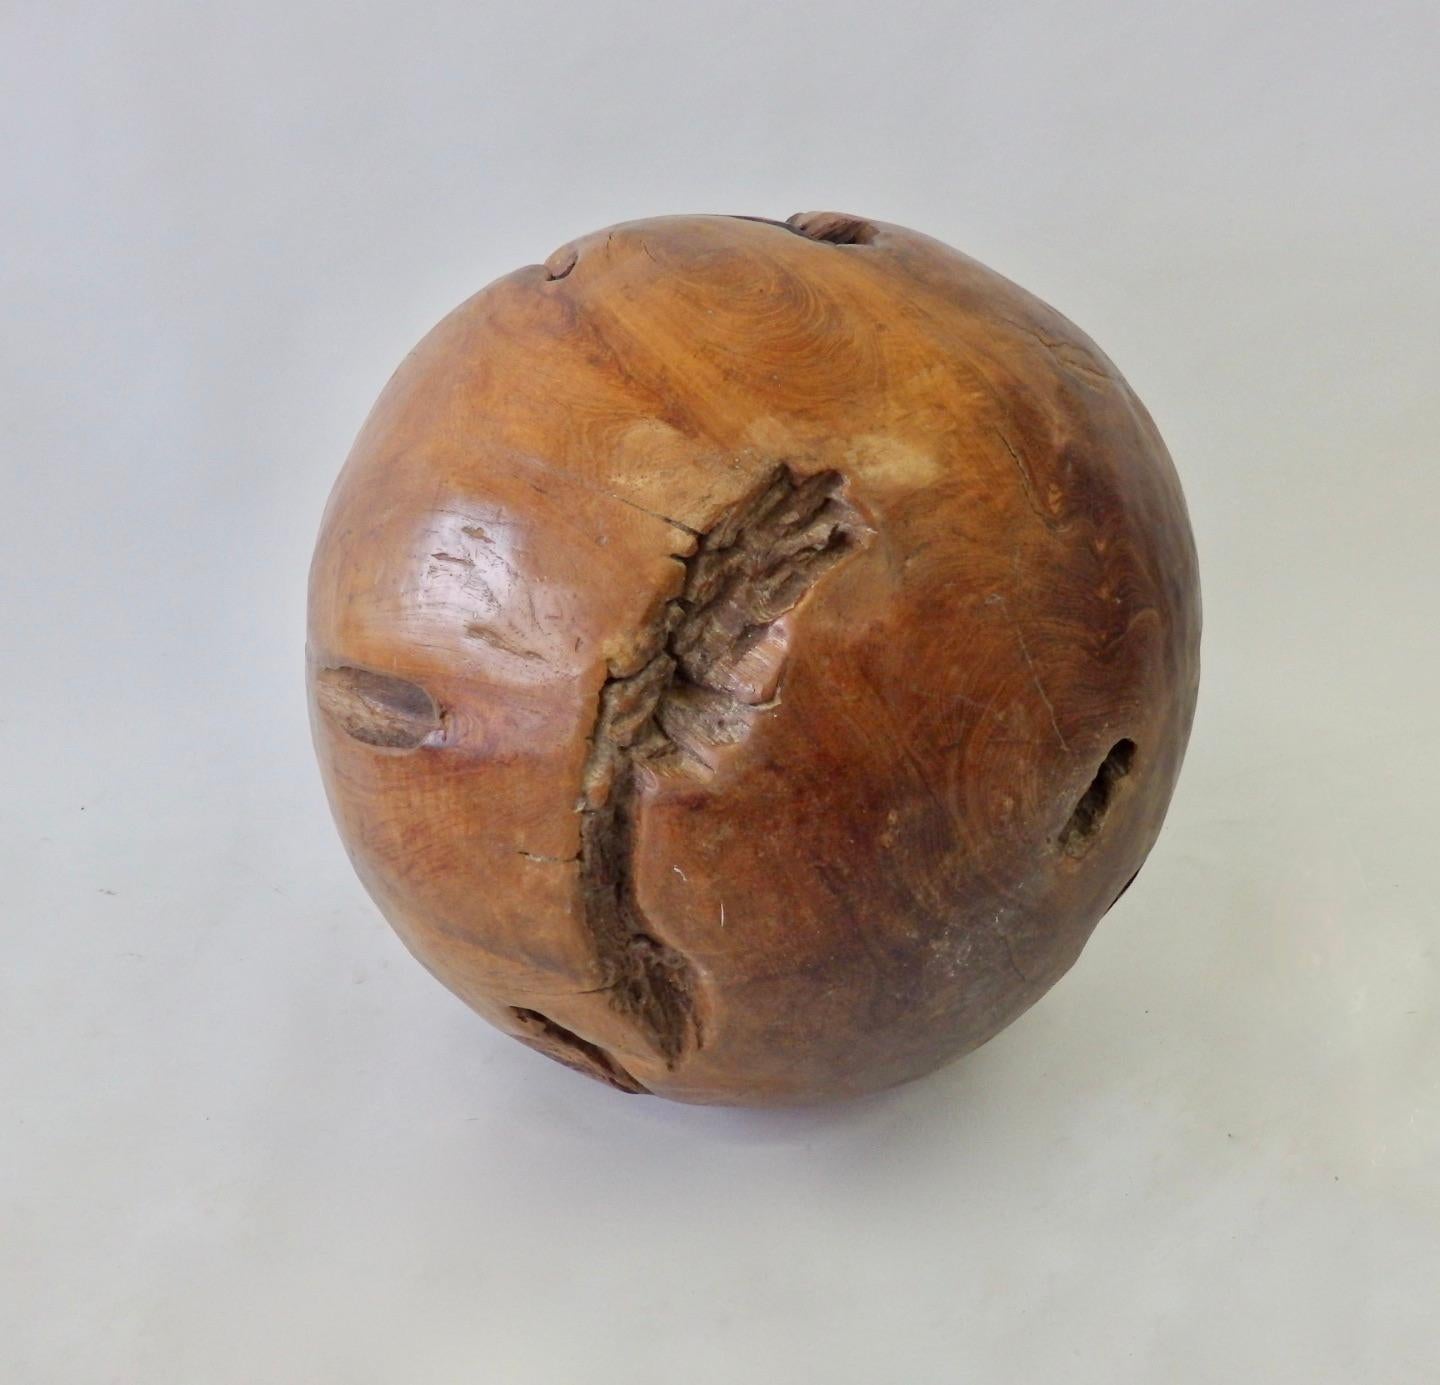 Hand-Crafted Giant Organic and Natural Wood Burl Ball For Sale